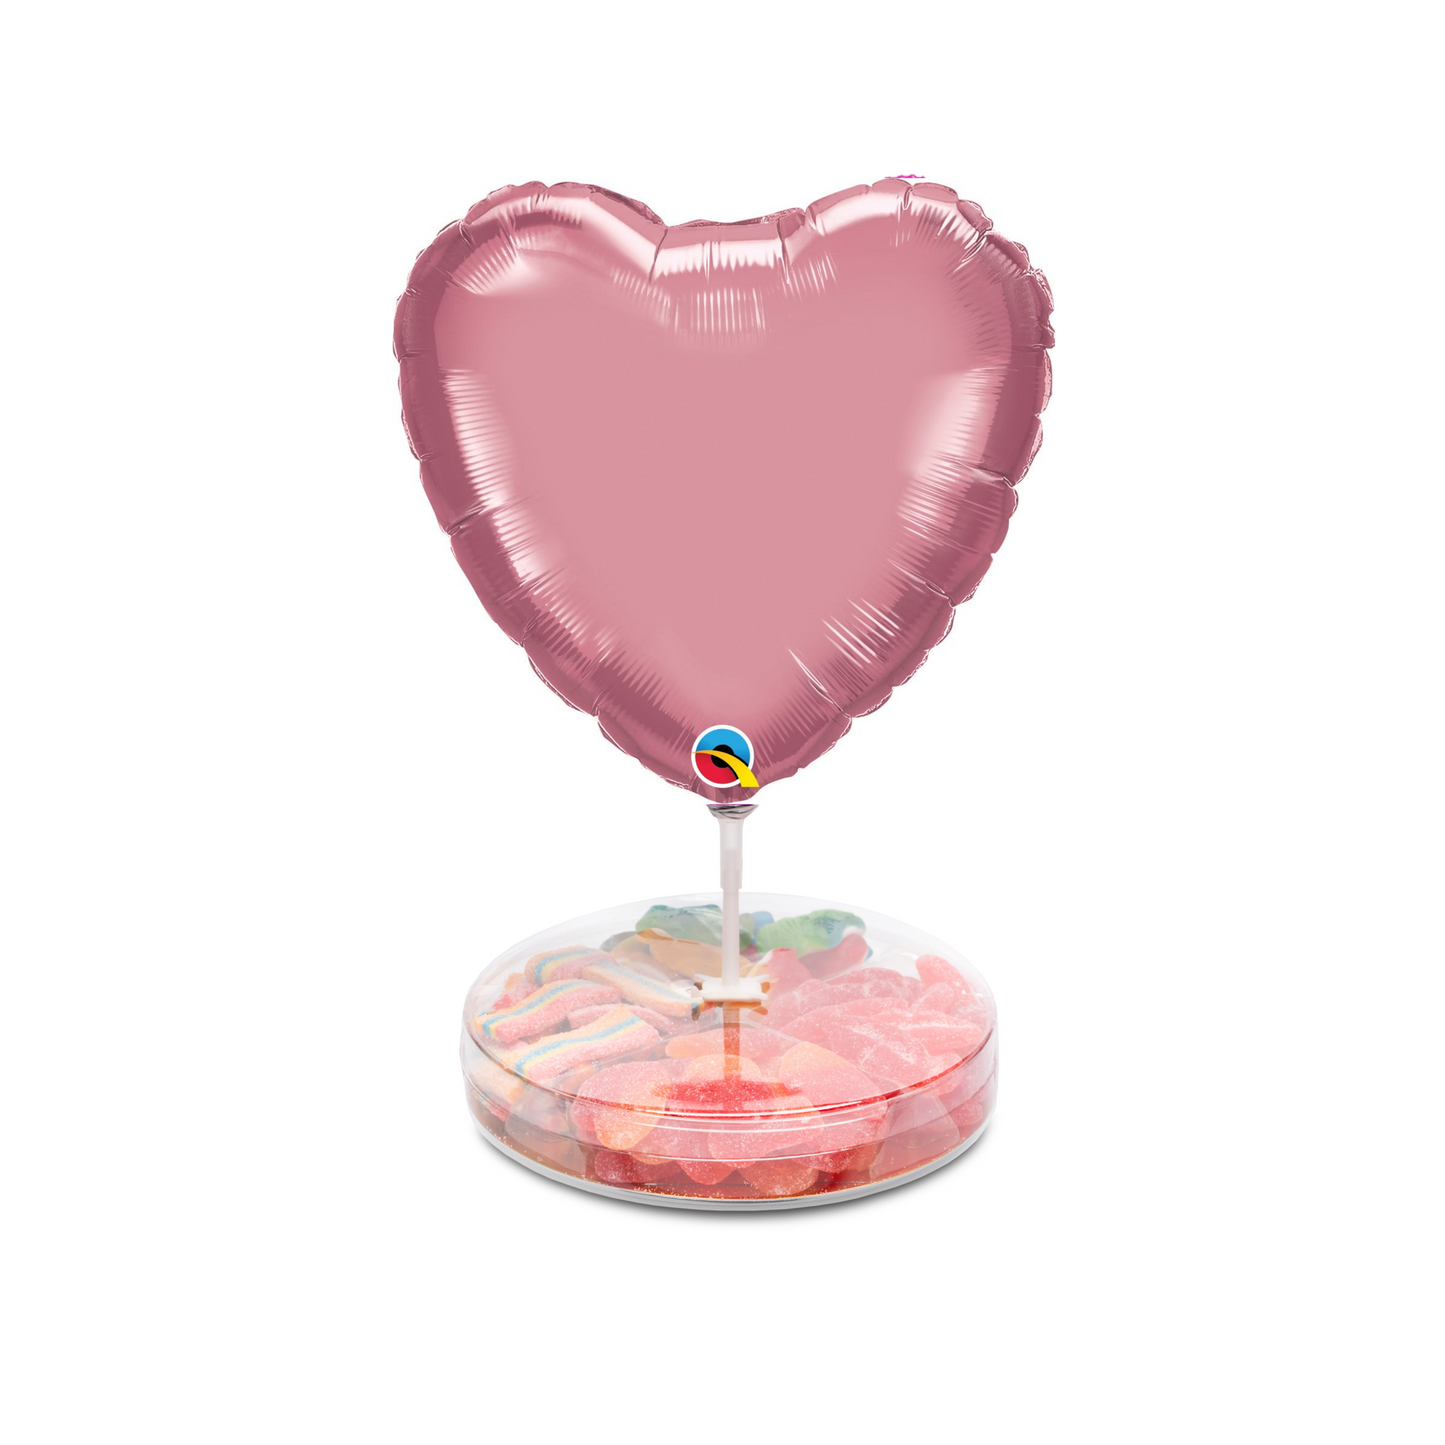 Small with Heart Shape Balloon